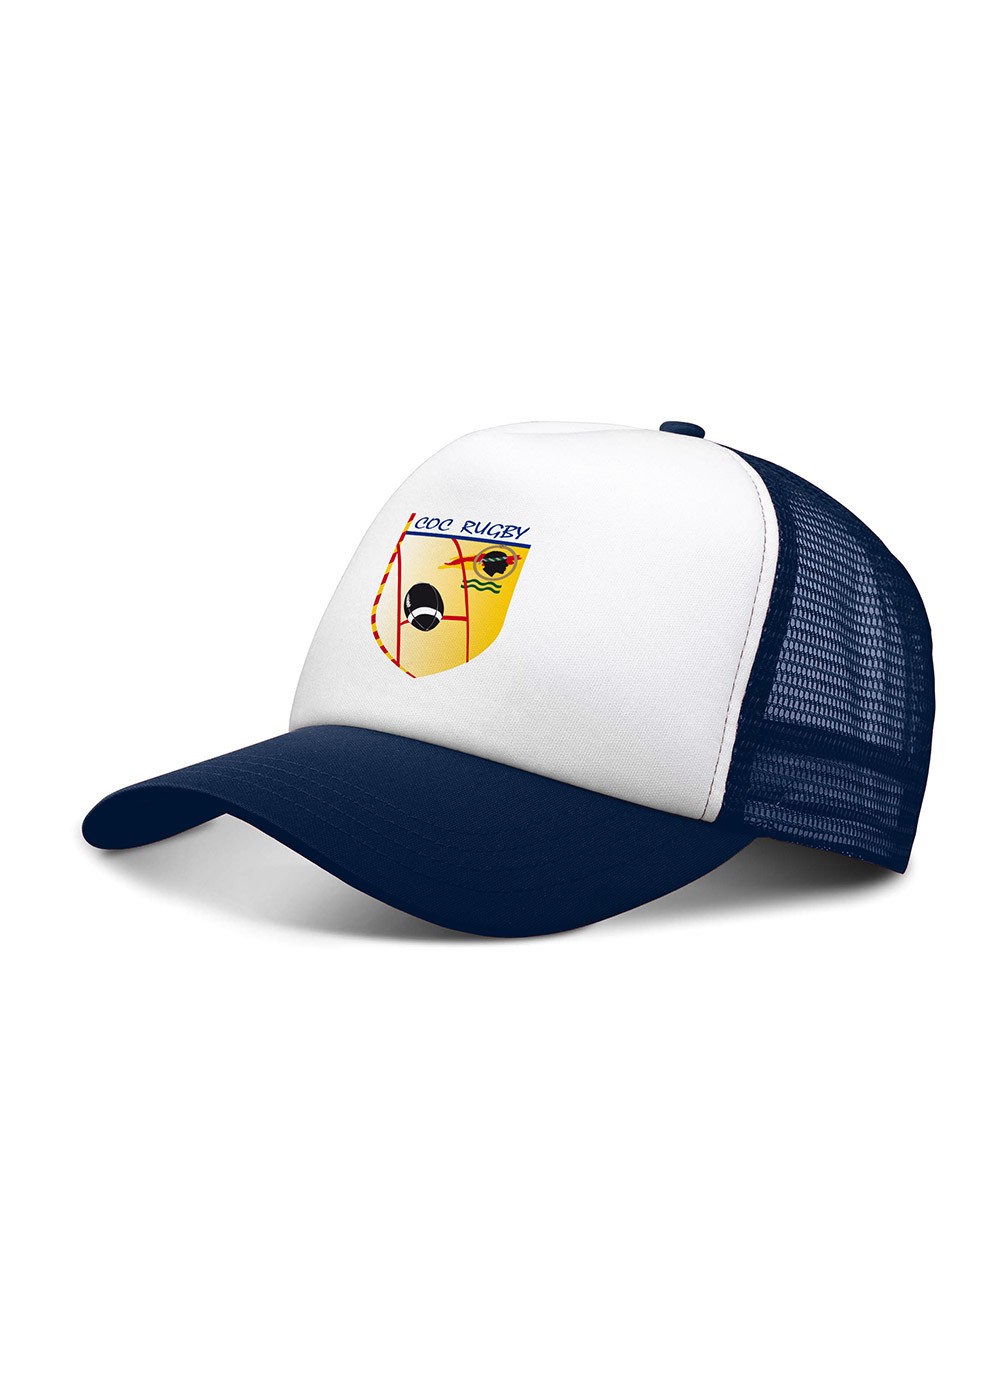 Casquette trucker COC Rugby